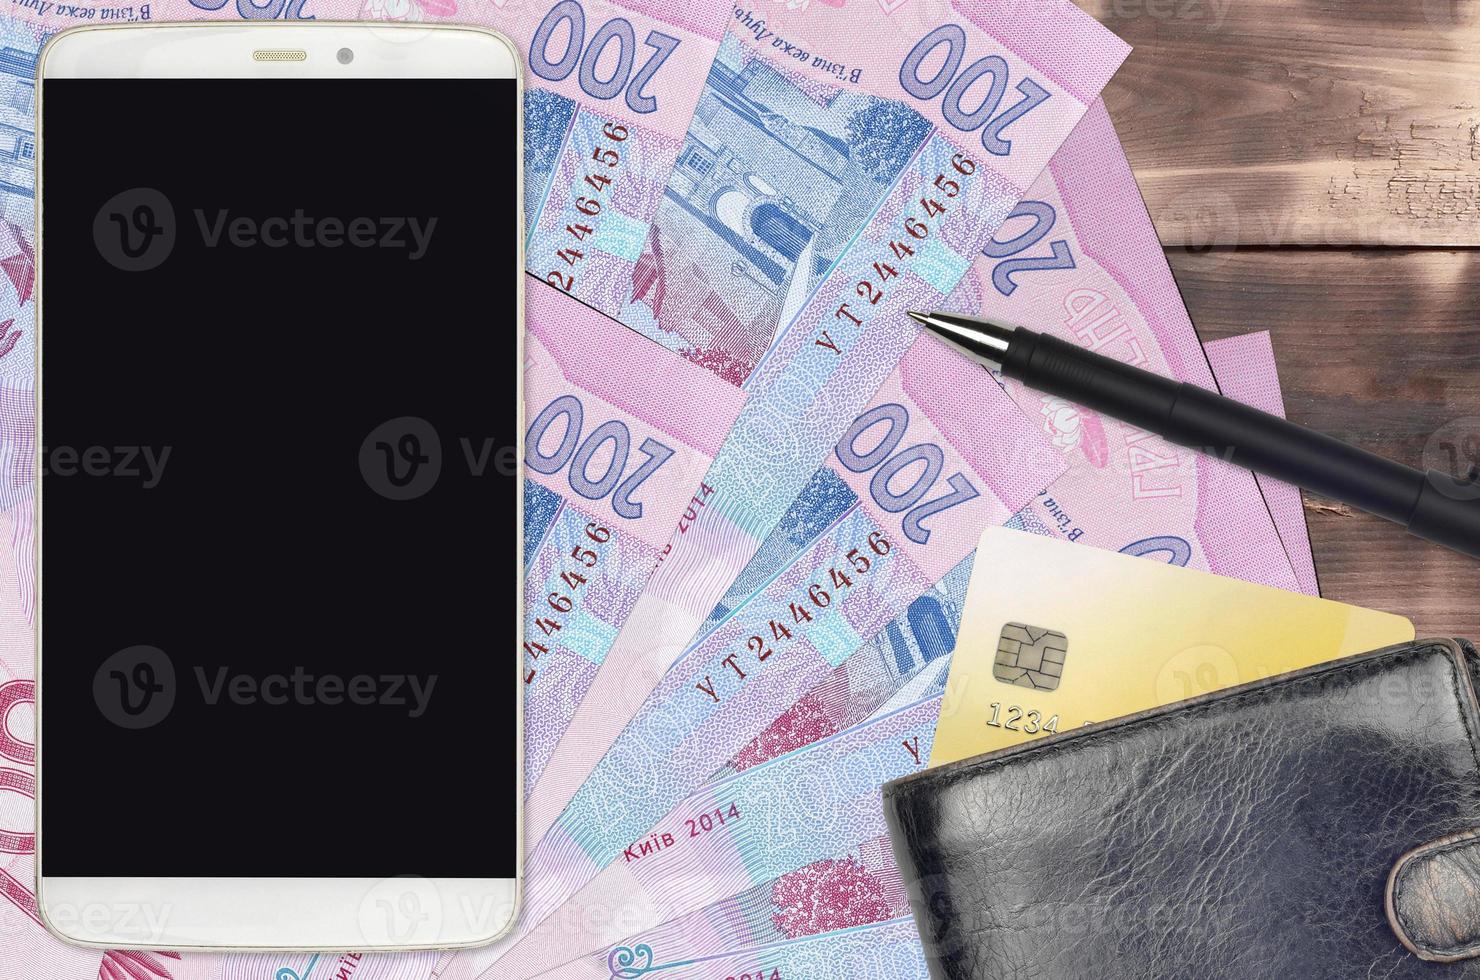 200 Ukrainian hryvnias bills and smartphone with purse and credit card. E-payments or e-commerce concept. Online shopping and business with portable devices photo